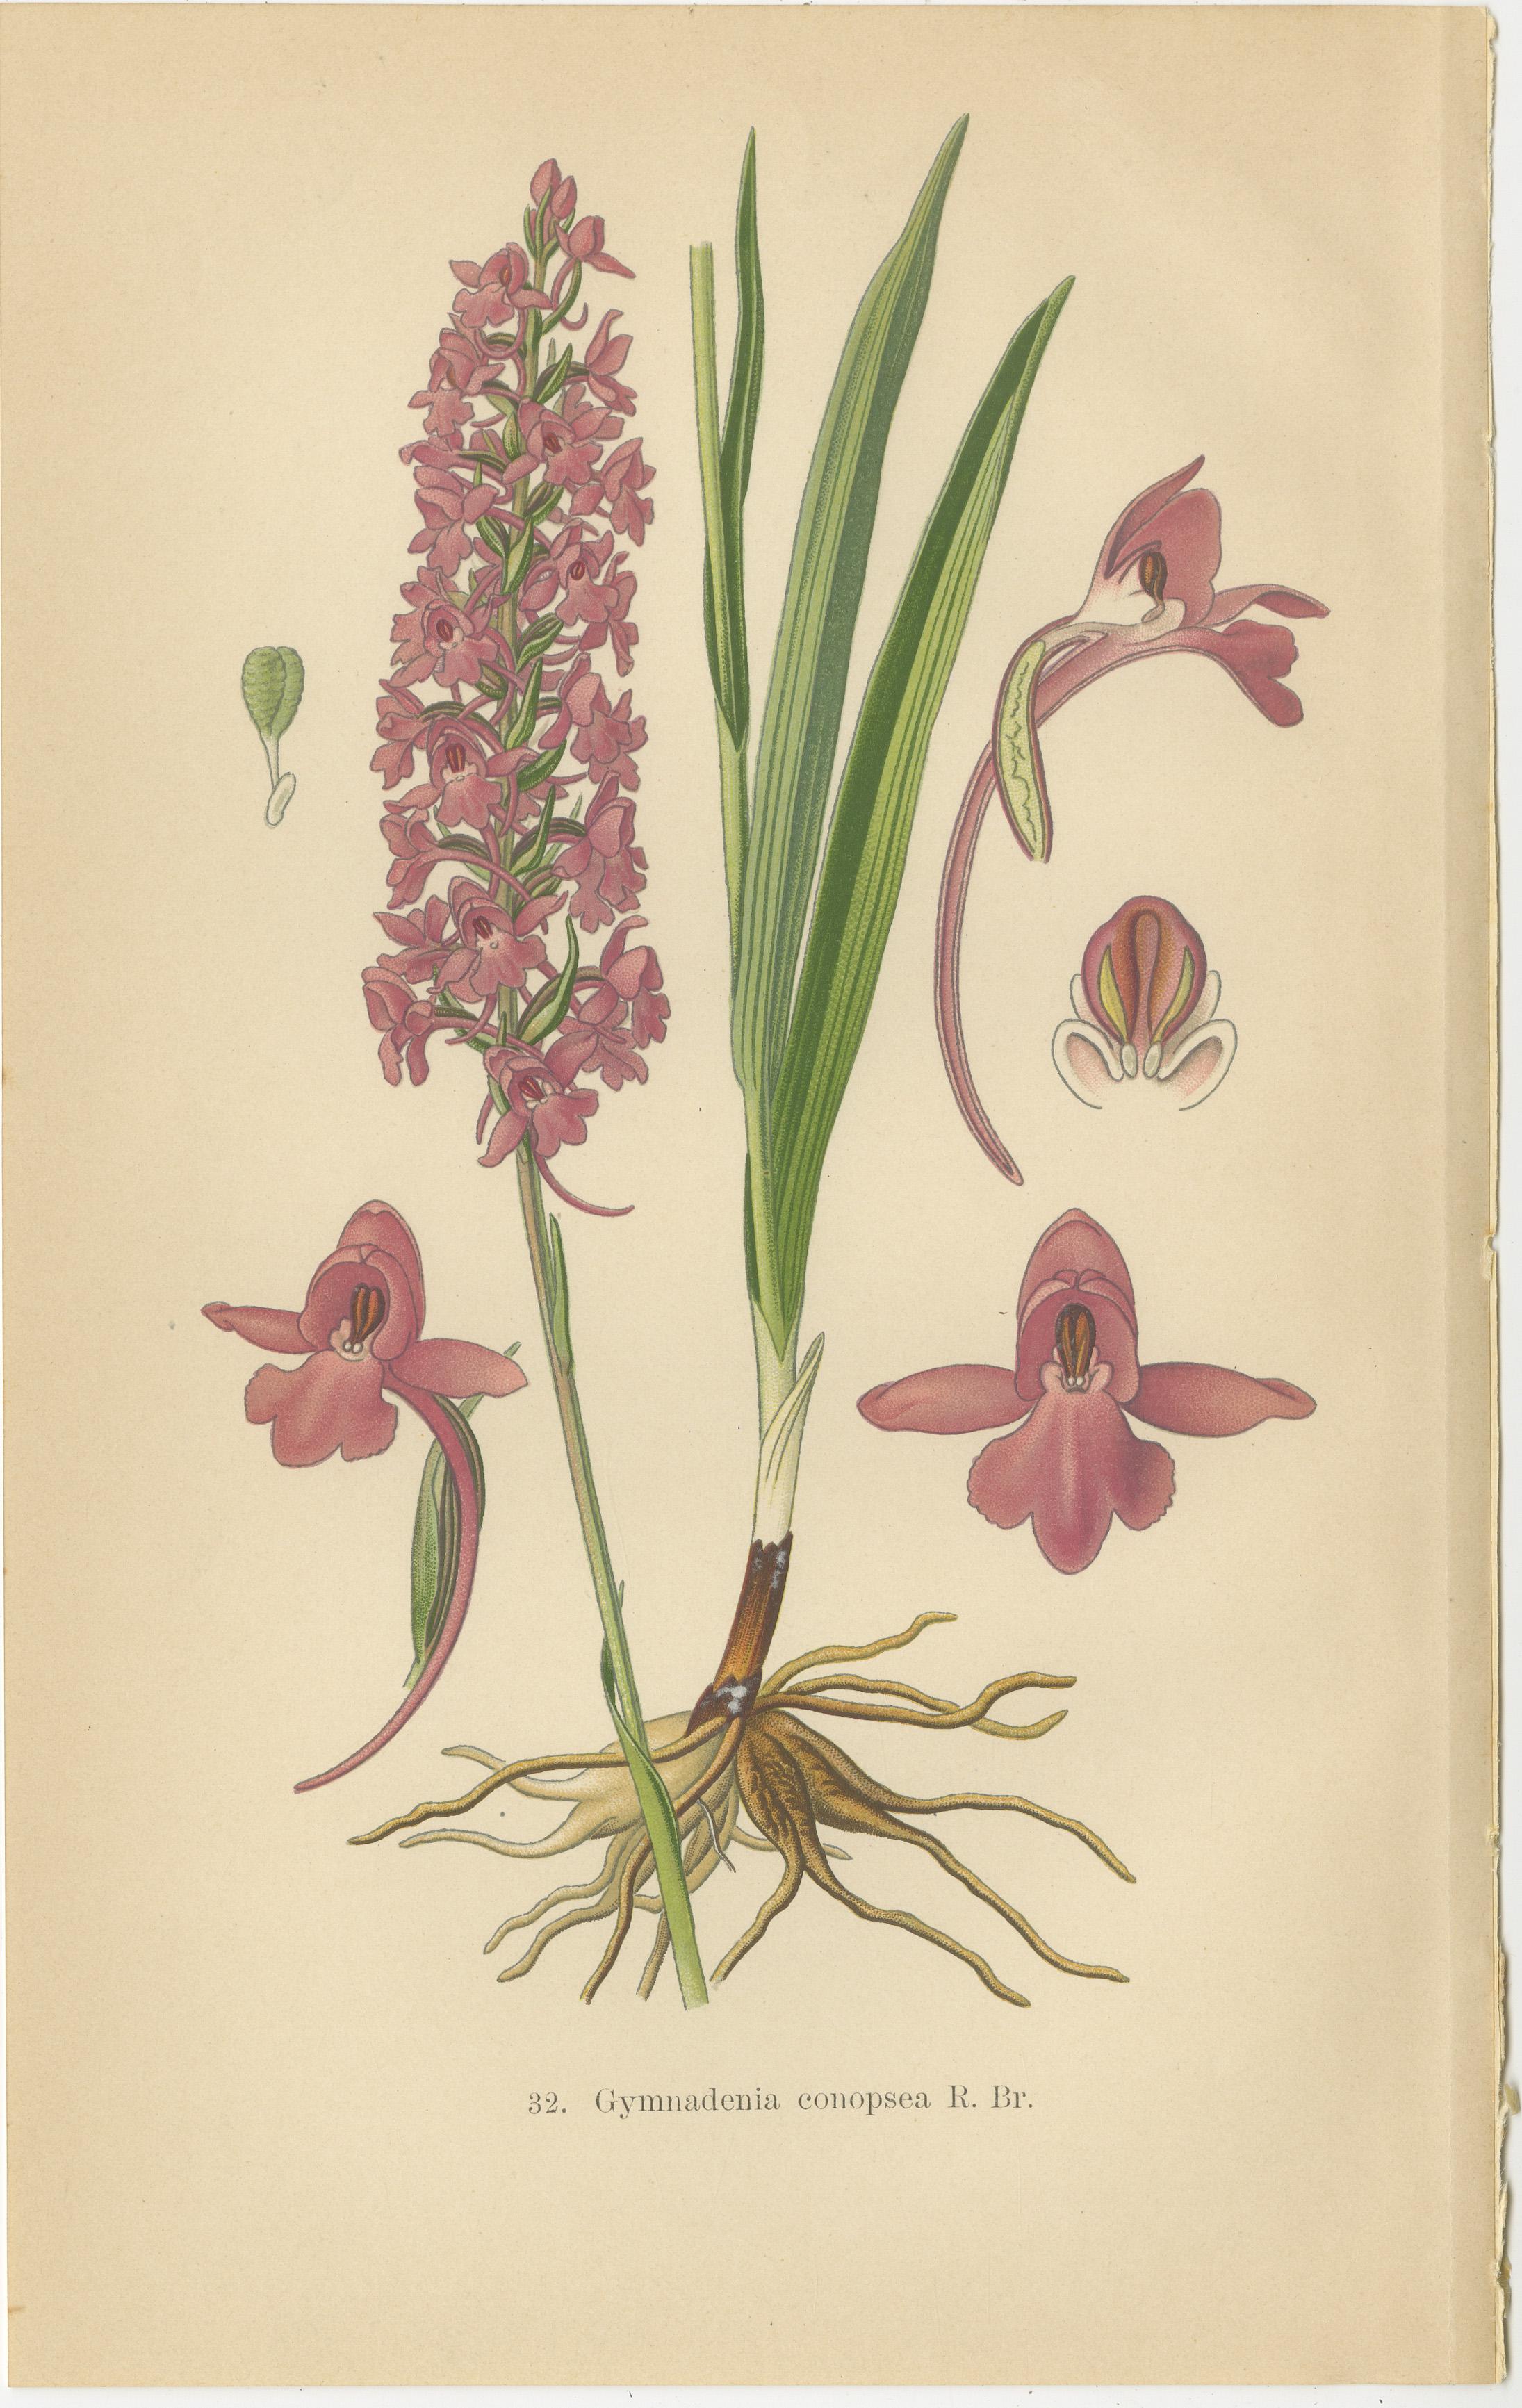 Early 20th Century Orchid Elegance: Walter Müller’s Botanical Art from 1904